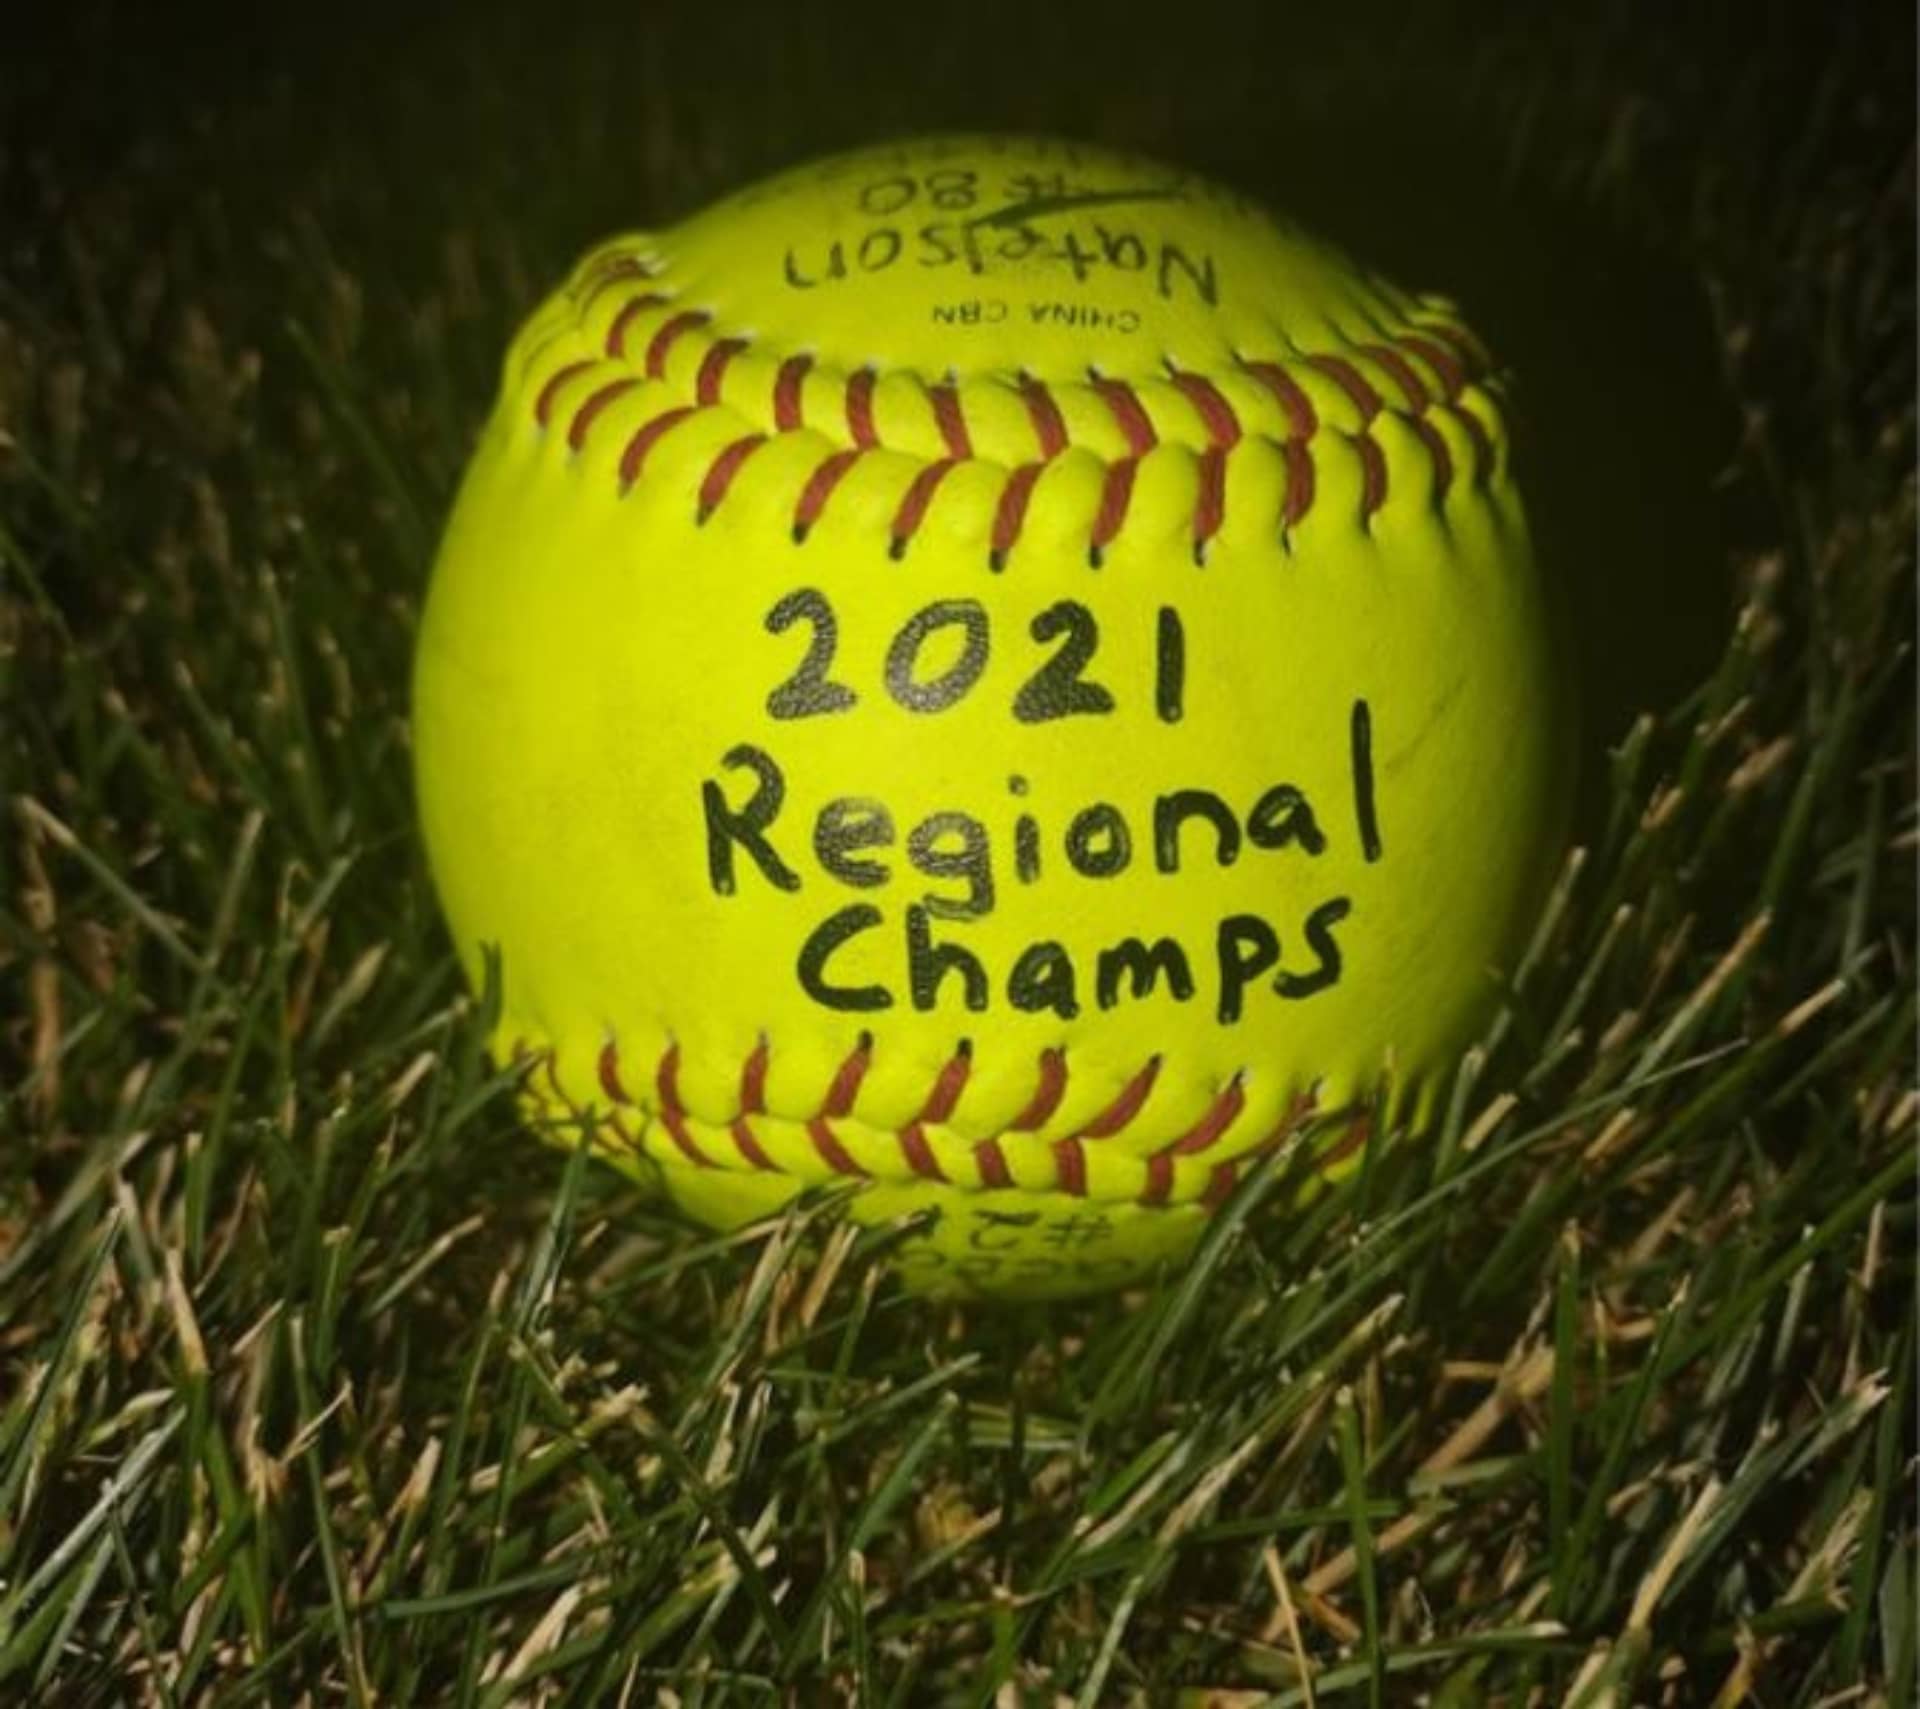 A softball with "2020 Regional Champs" written on it